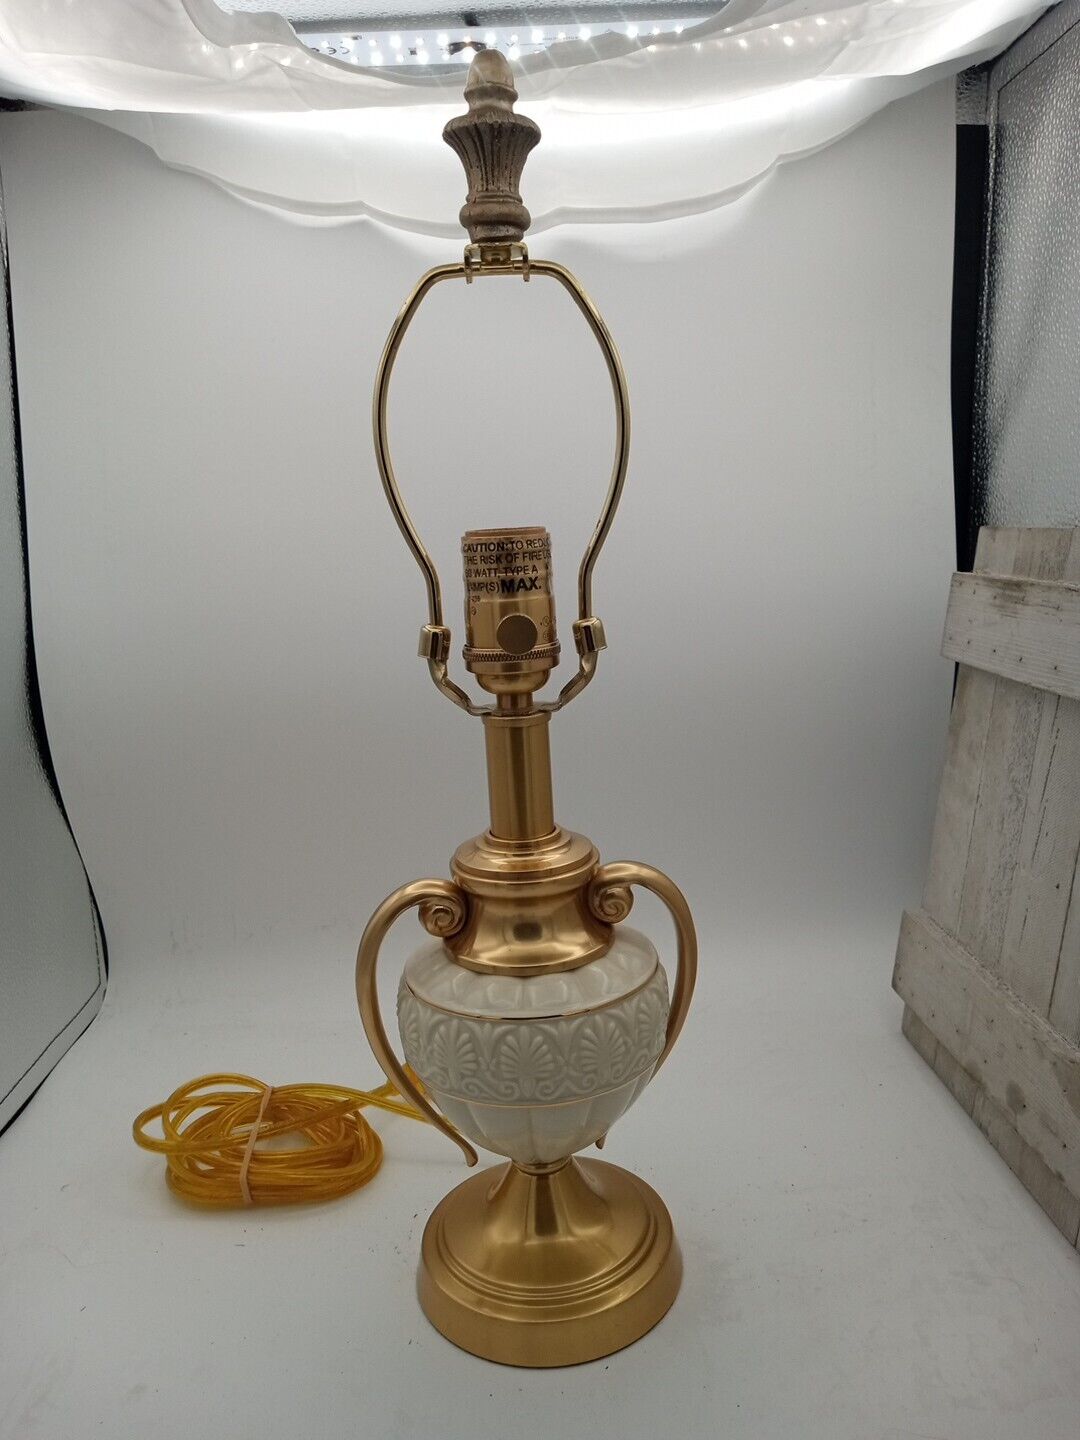 Lenox Lamp Made By Quoizel Lamp Athenian Style Brass Gold Trim Off White Ceramic